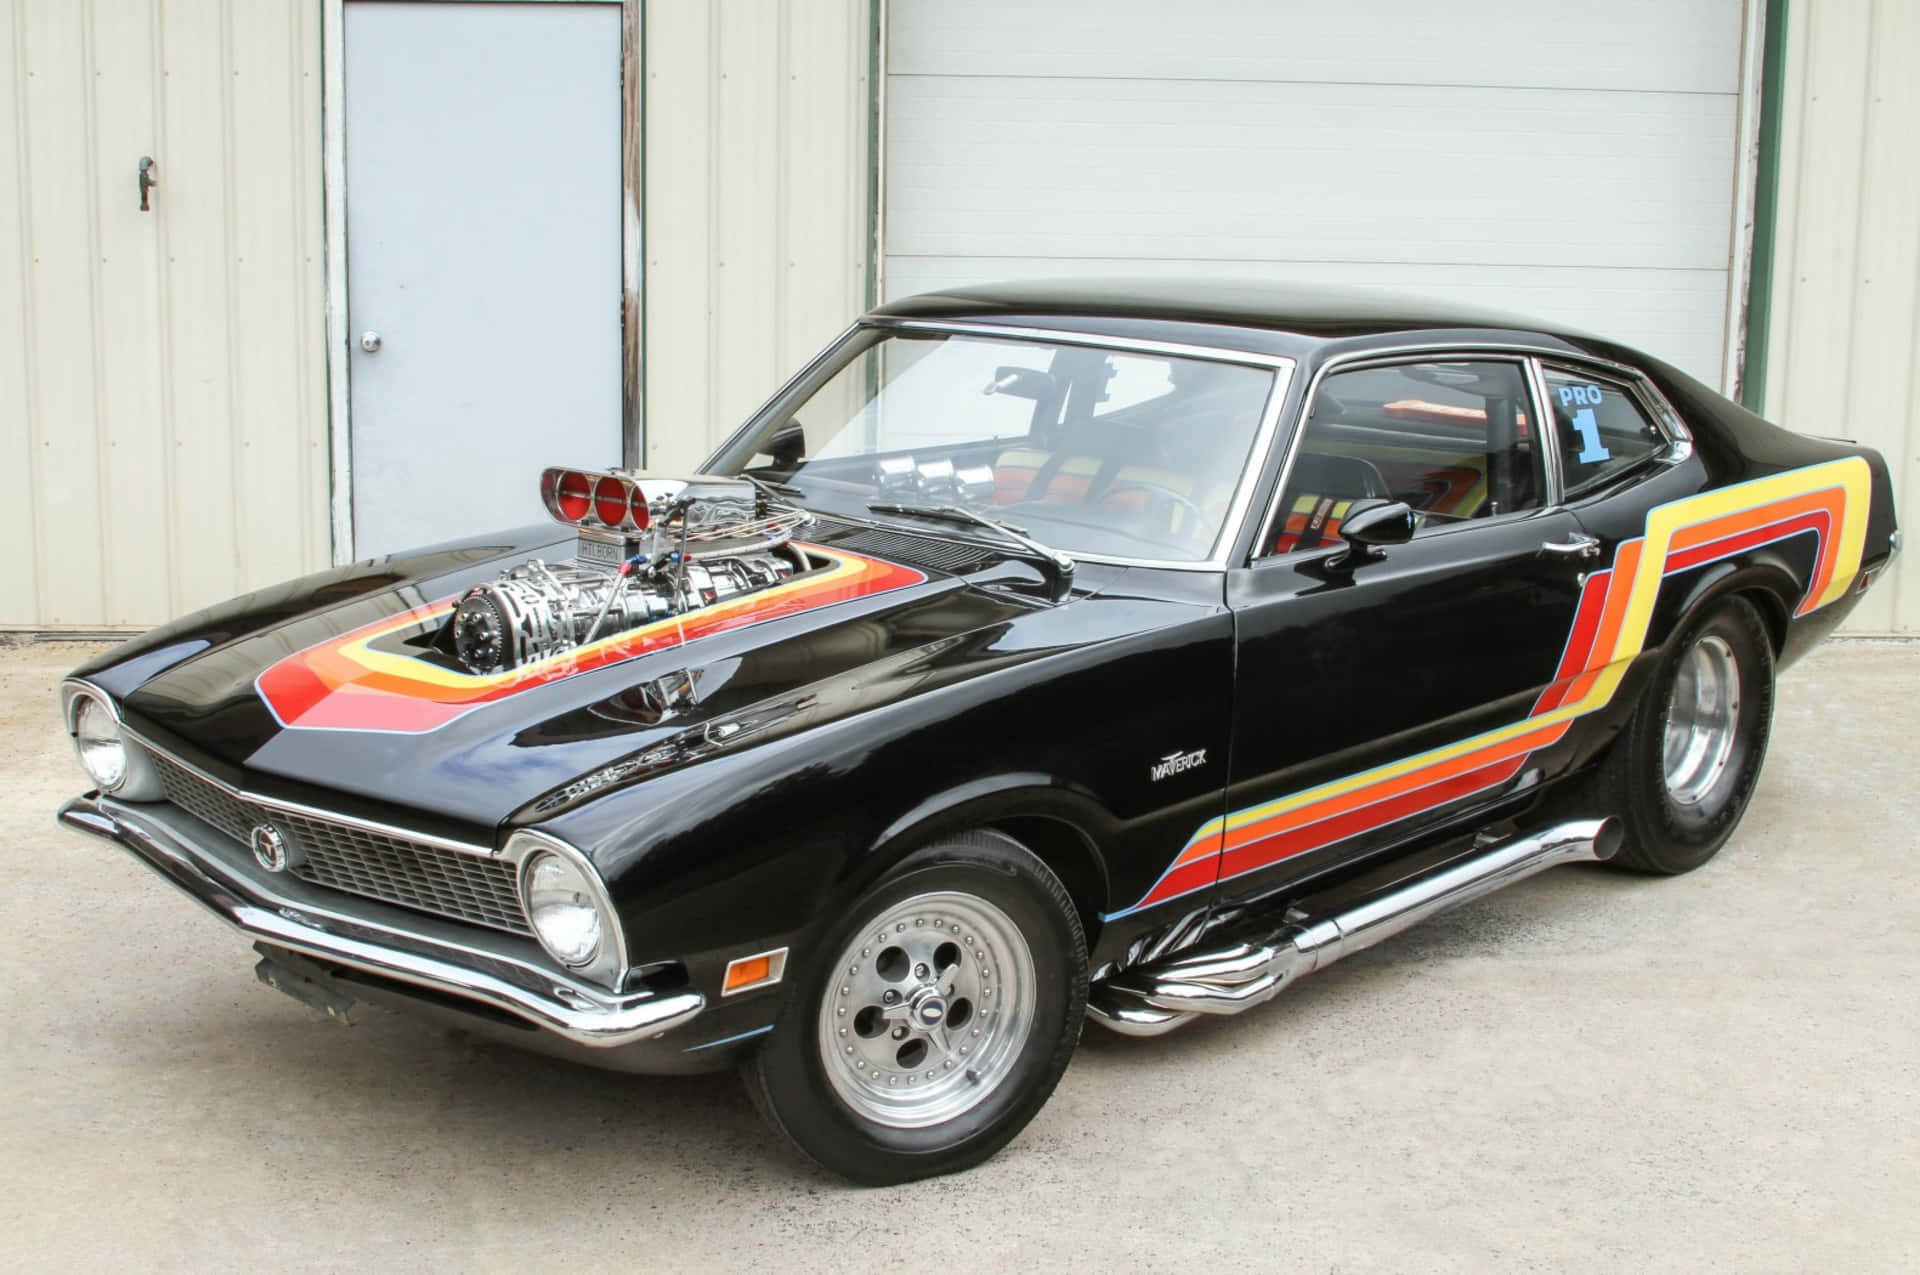 A Black And Red Muscle Car With A Red And Yellow Stripe